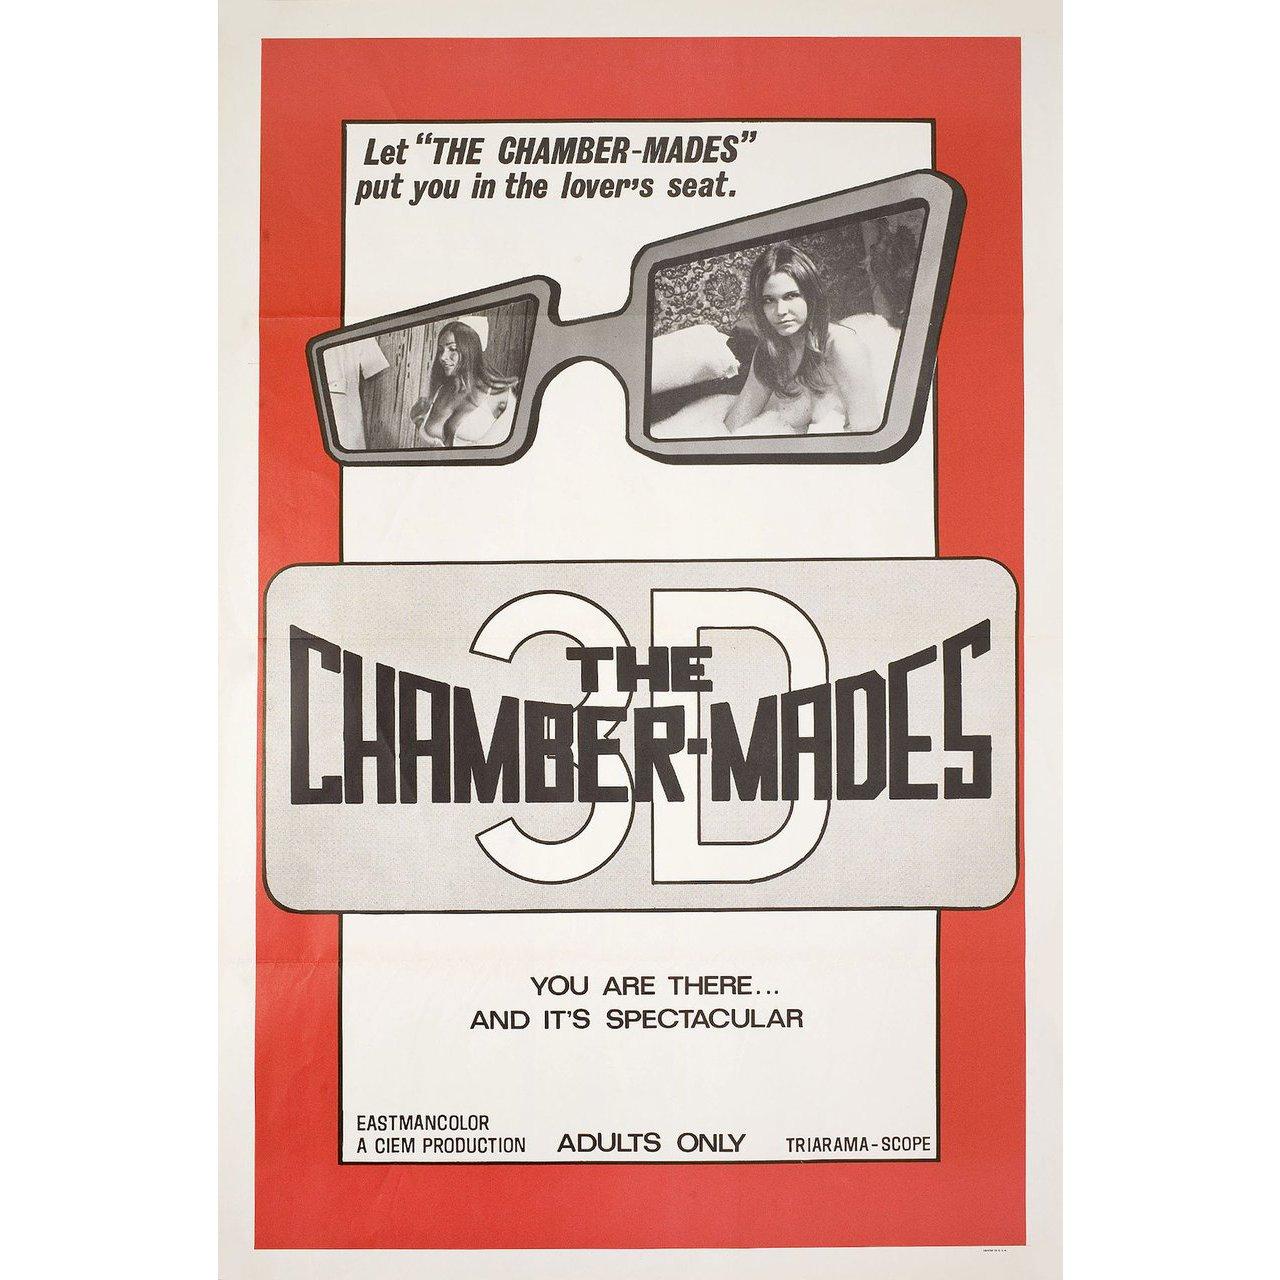 Original 1975 U.S. one sheet poster for the film “The Chamber-Mades”. Fine condition, tri-fold. Many original posters were issued folded or were subsequently folded. Please note: the size is stated in inches and the actual size can vary by an inch